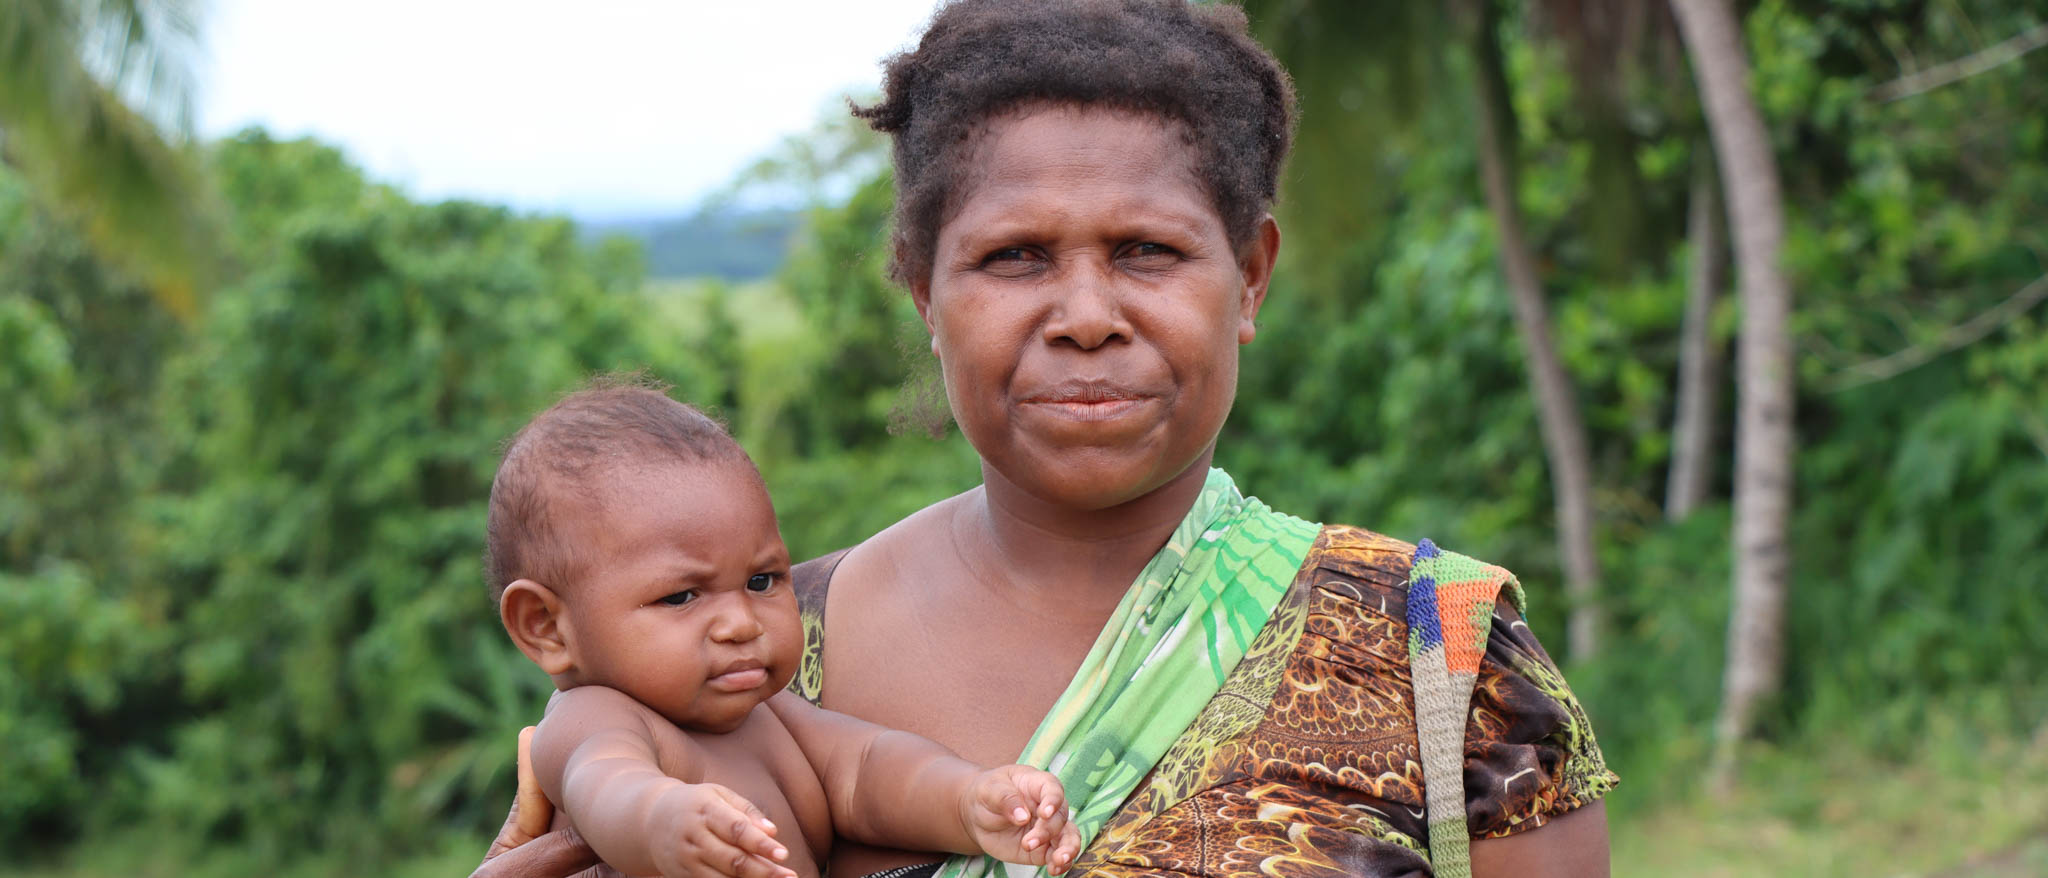 Jemmi Kivori, a rural businesswoman and mother of 7.